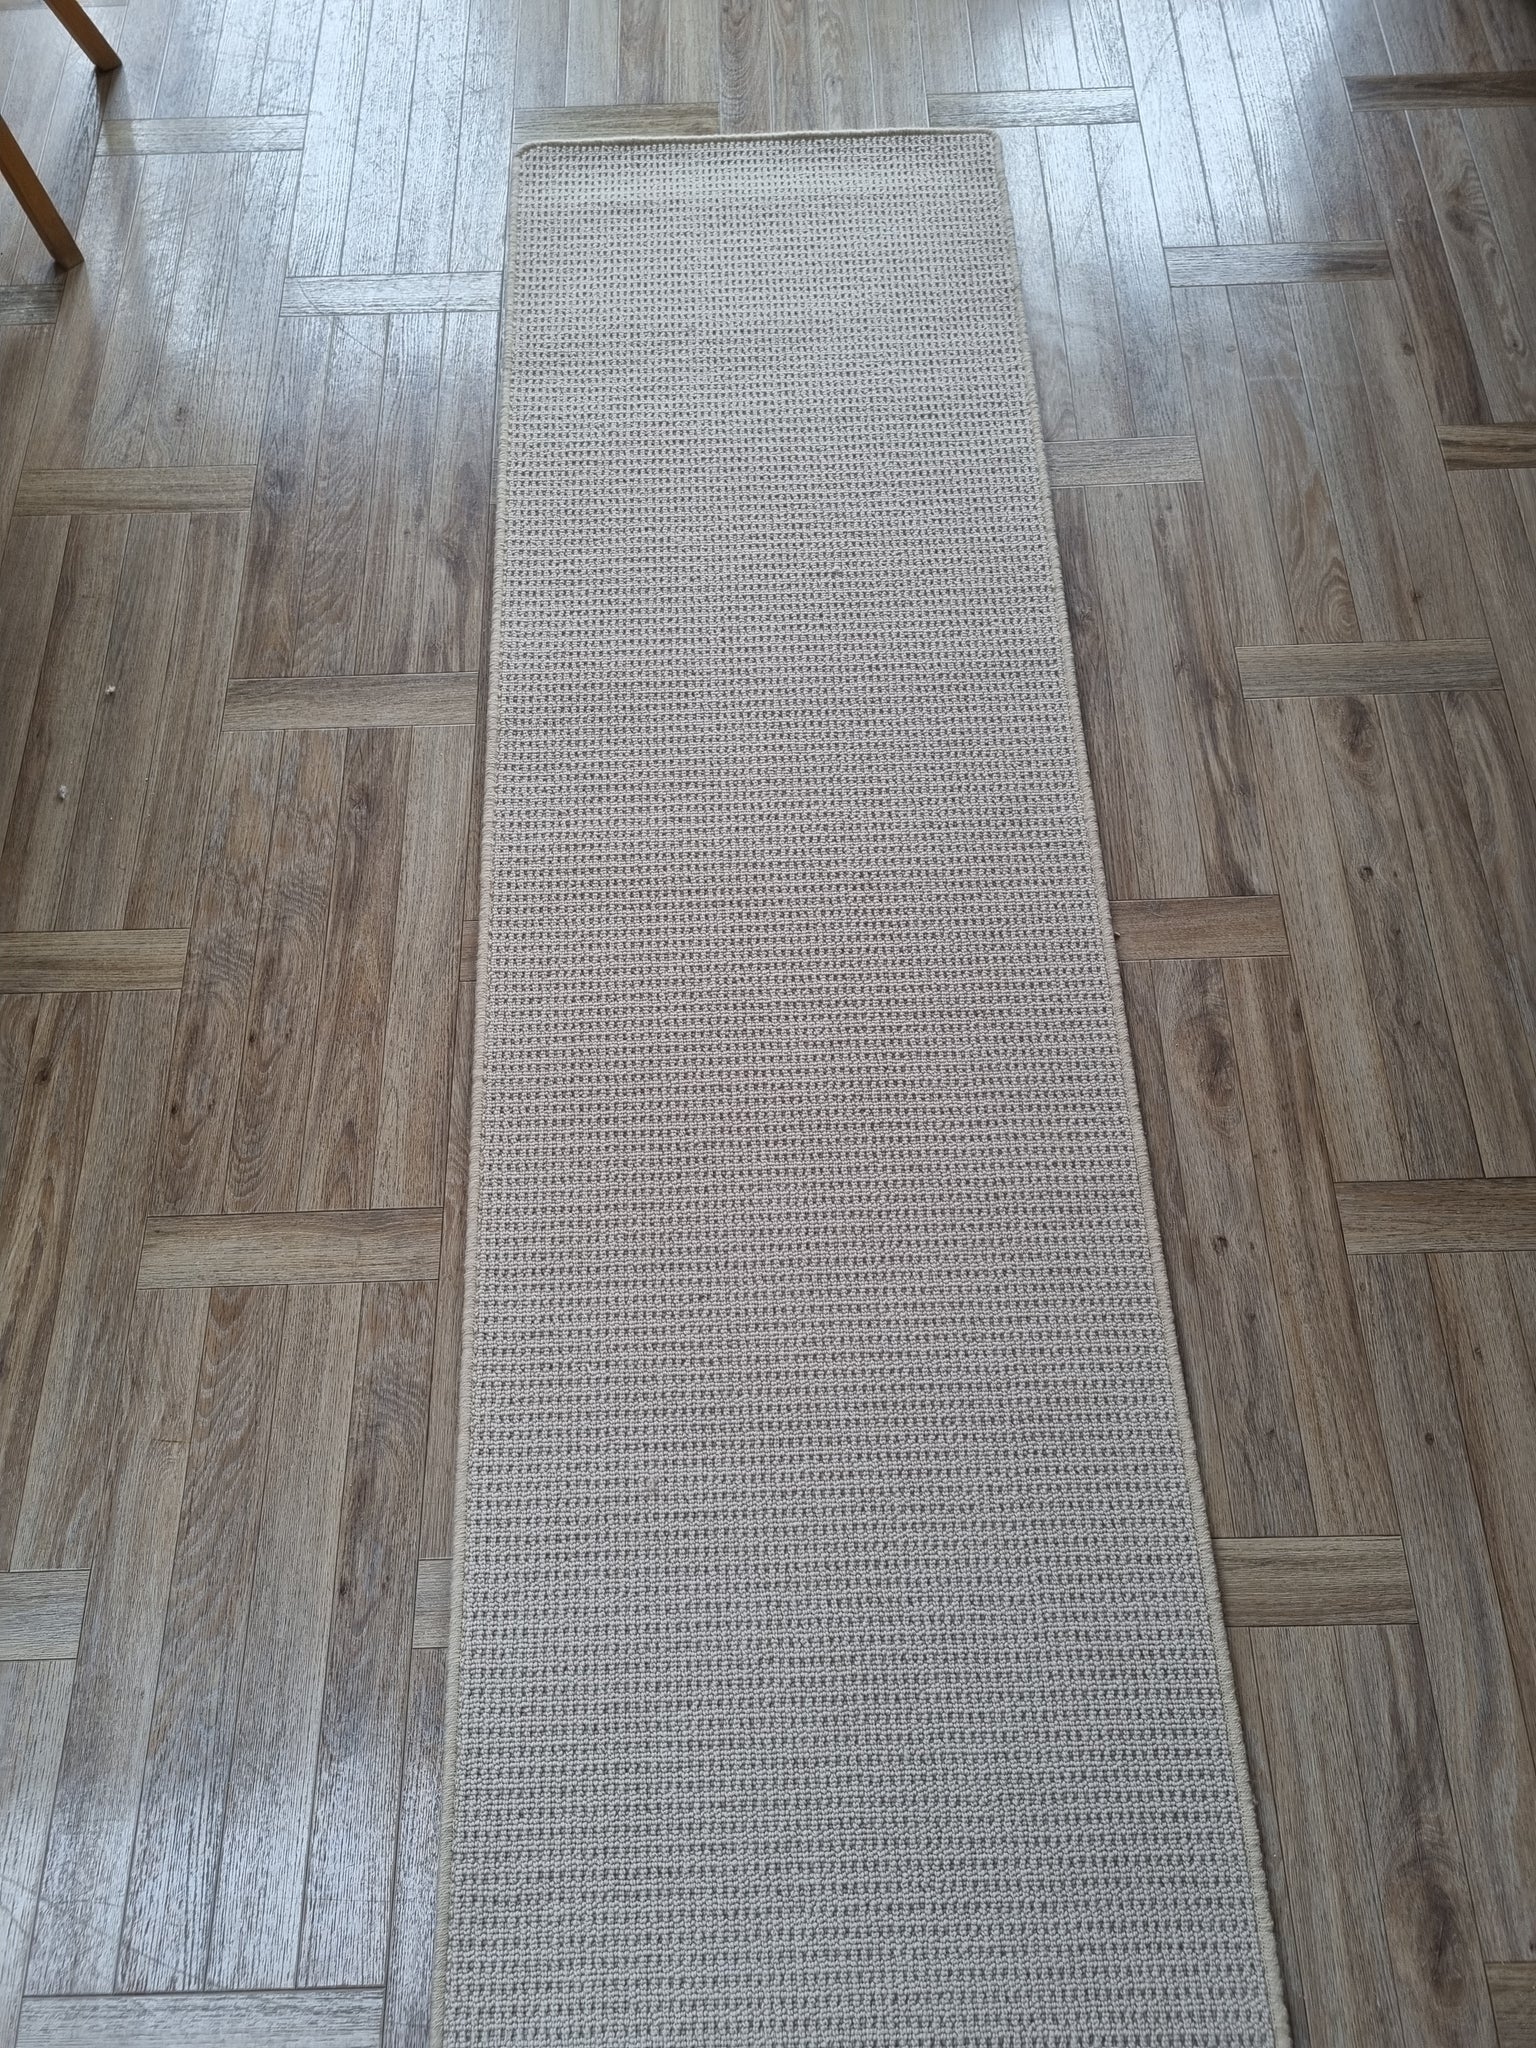 Cormar Pimlico Pavilion texture beige wool loop rug and floor runner with whipped edge